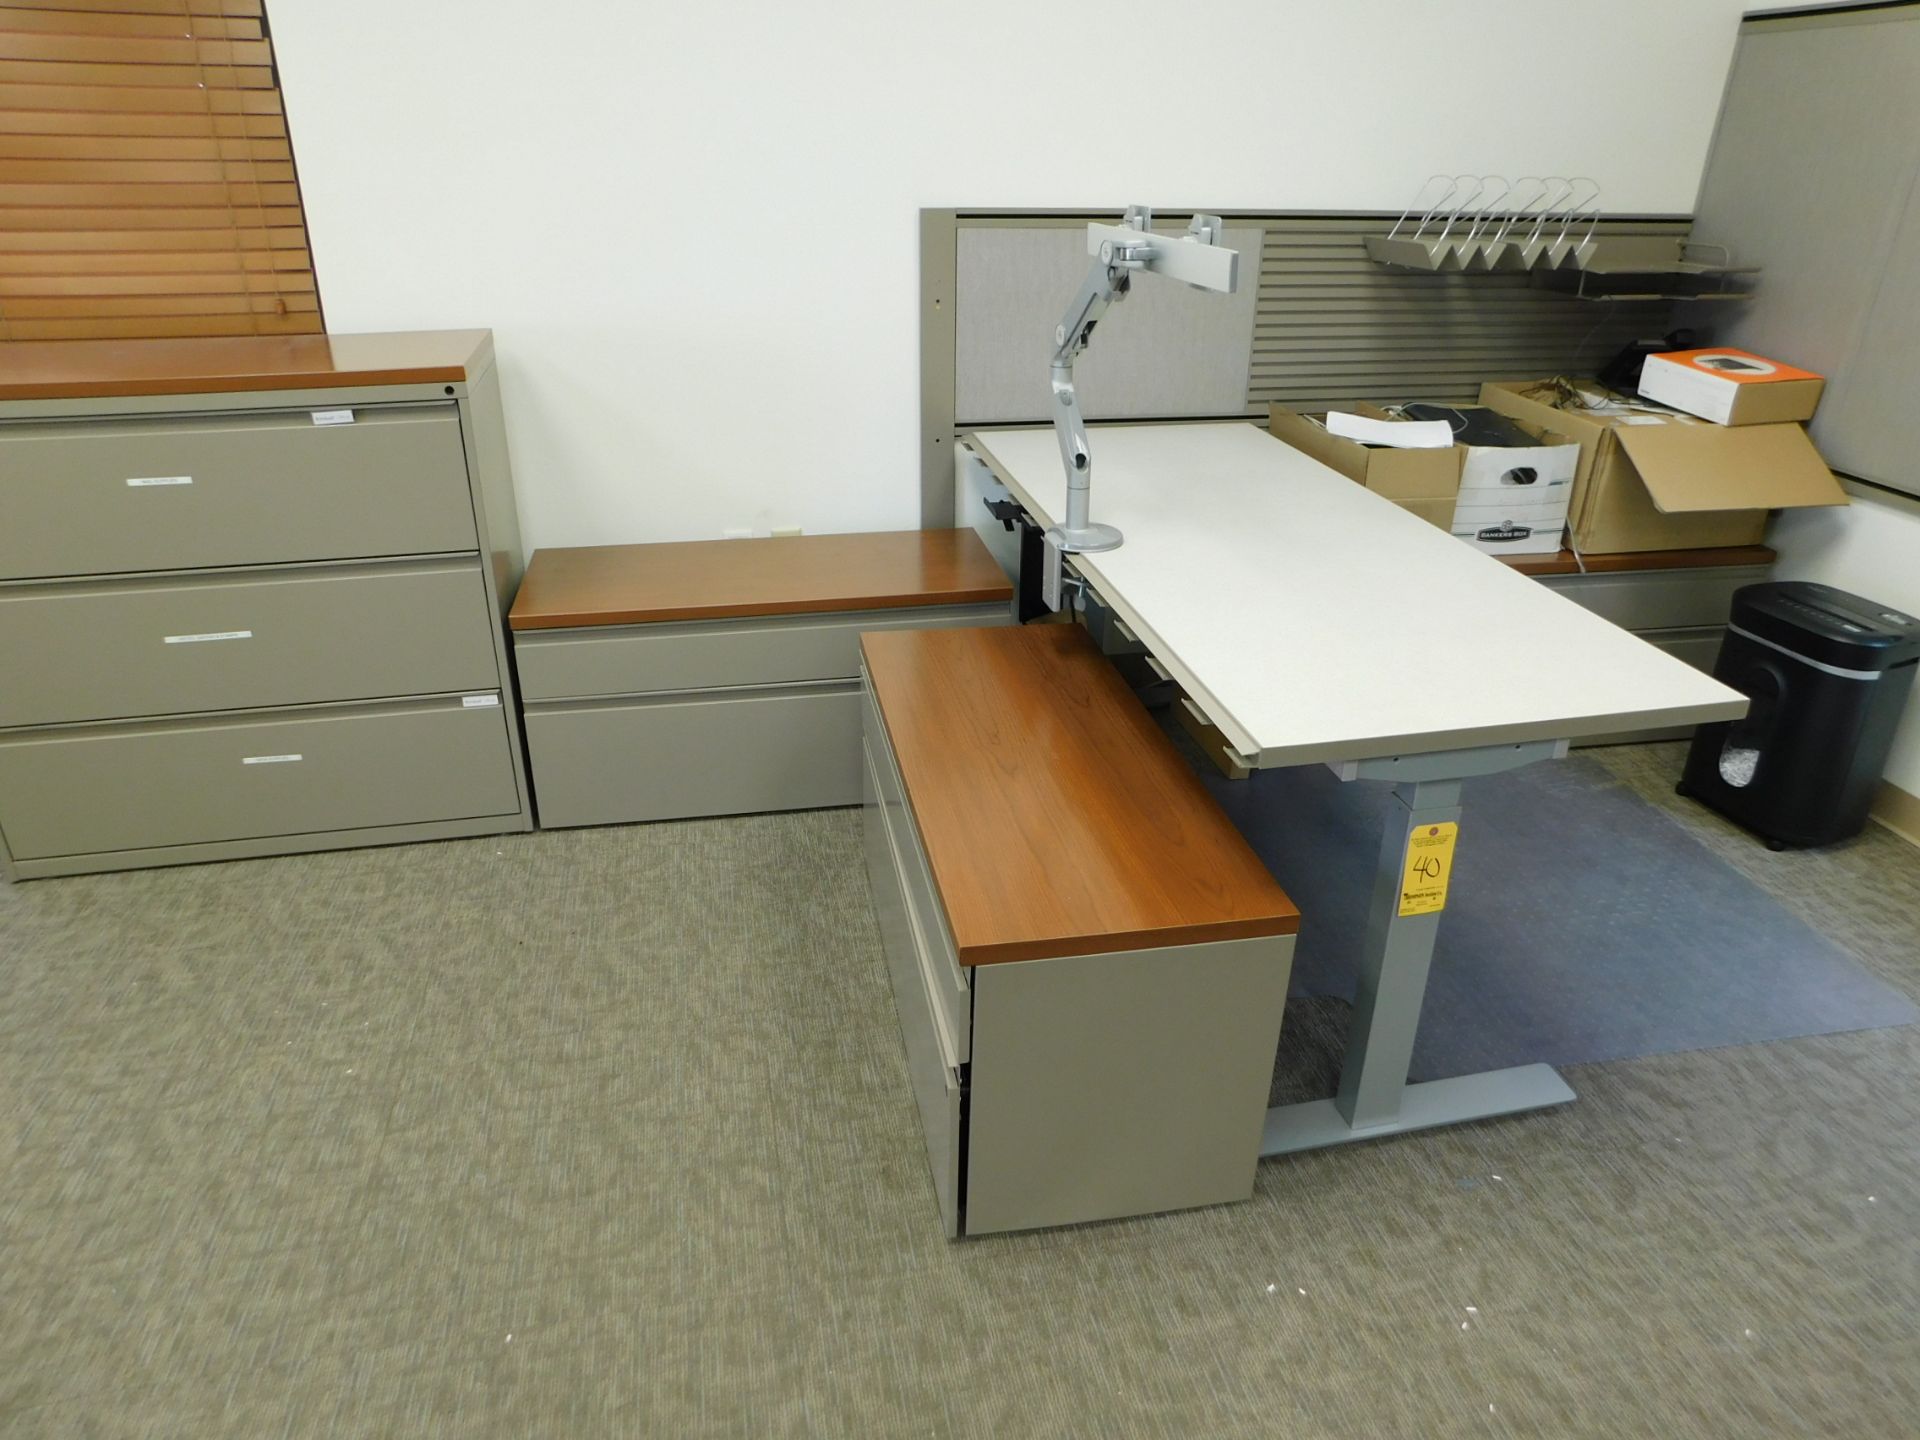 (1) 3 Drawer Lateral File Cabinet, (3) 2 Drawer Lateral File Cabinets, Paper Shredder, Misc. Phones,